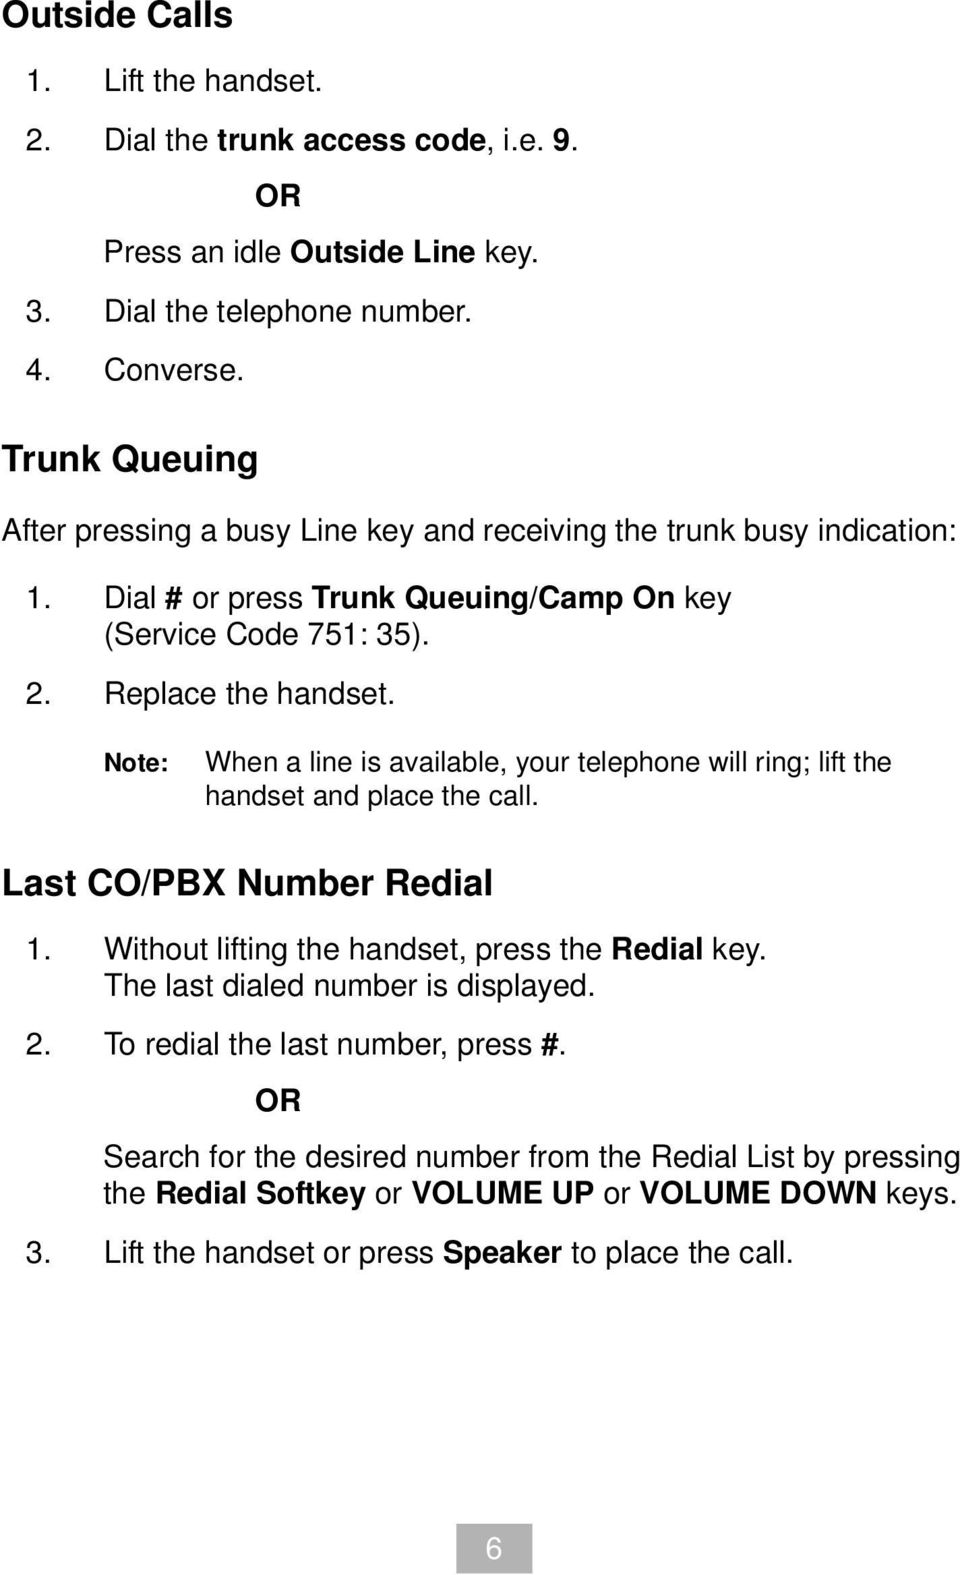 When a line is available, your telephone will ring; lift the handset and place the call. Last CO/PBX Number Redial 1. Without lifting the handset, press the Redial key.